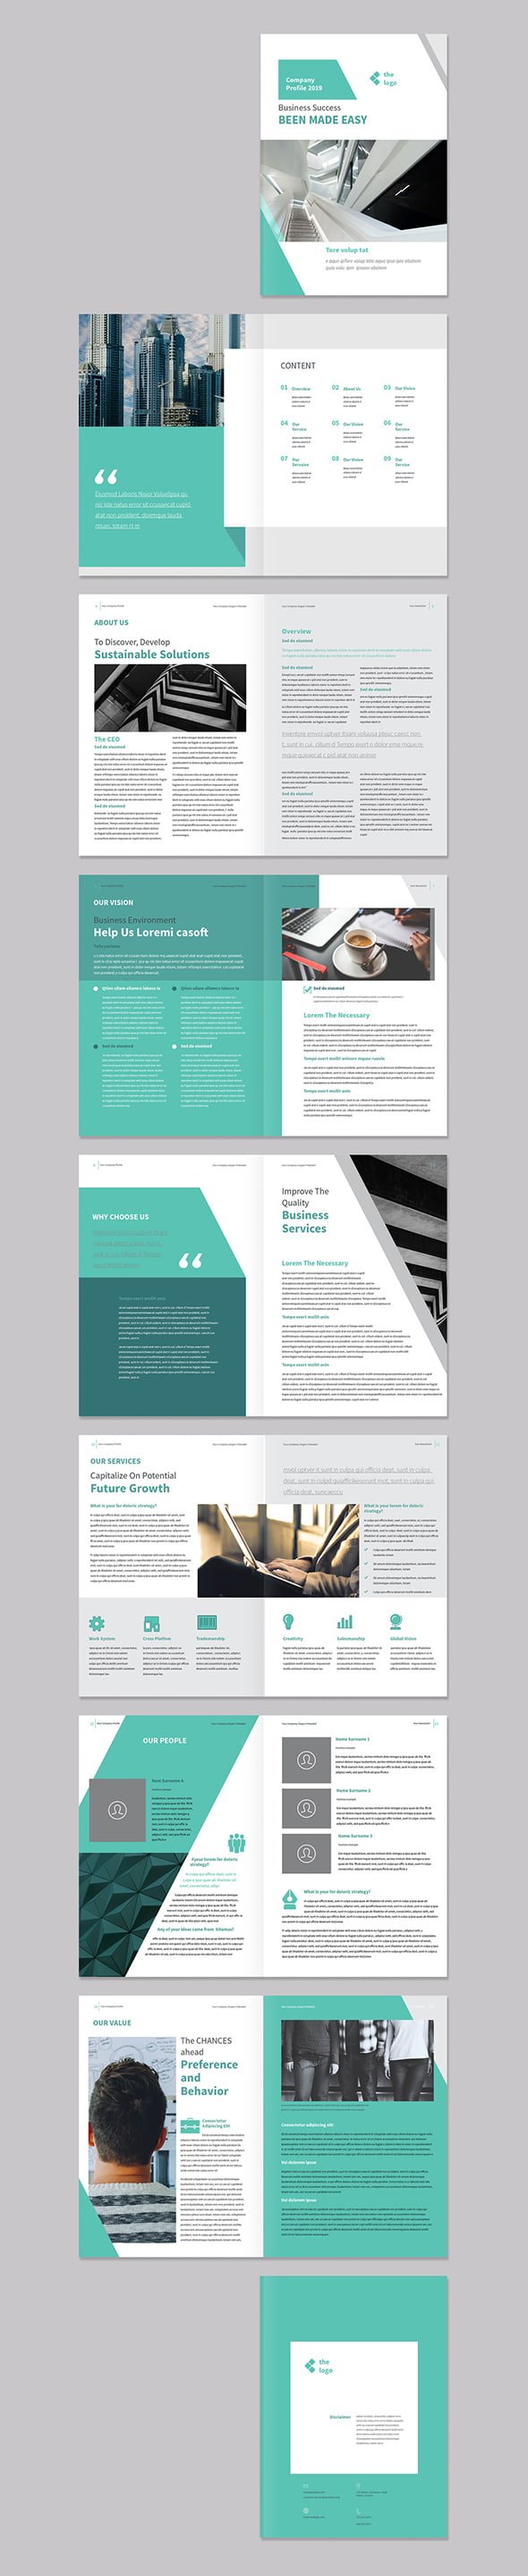 AdobeStock - Brochure Layout with Green Accents - 220996741